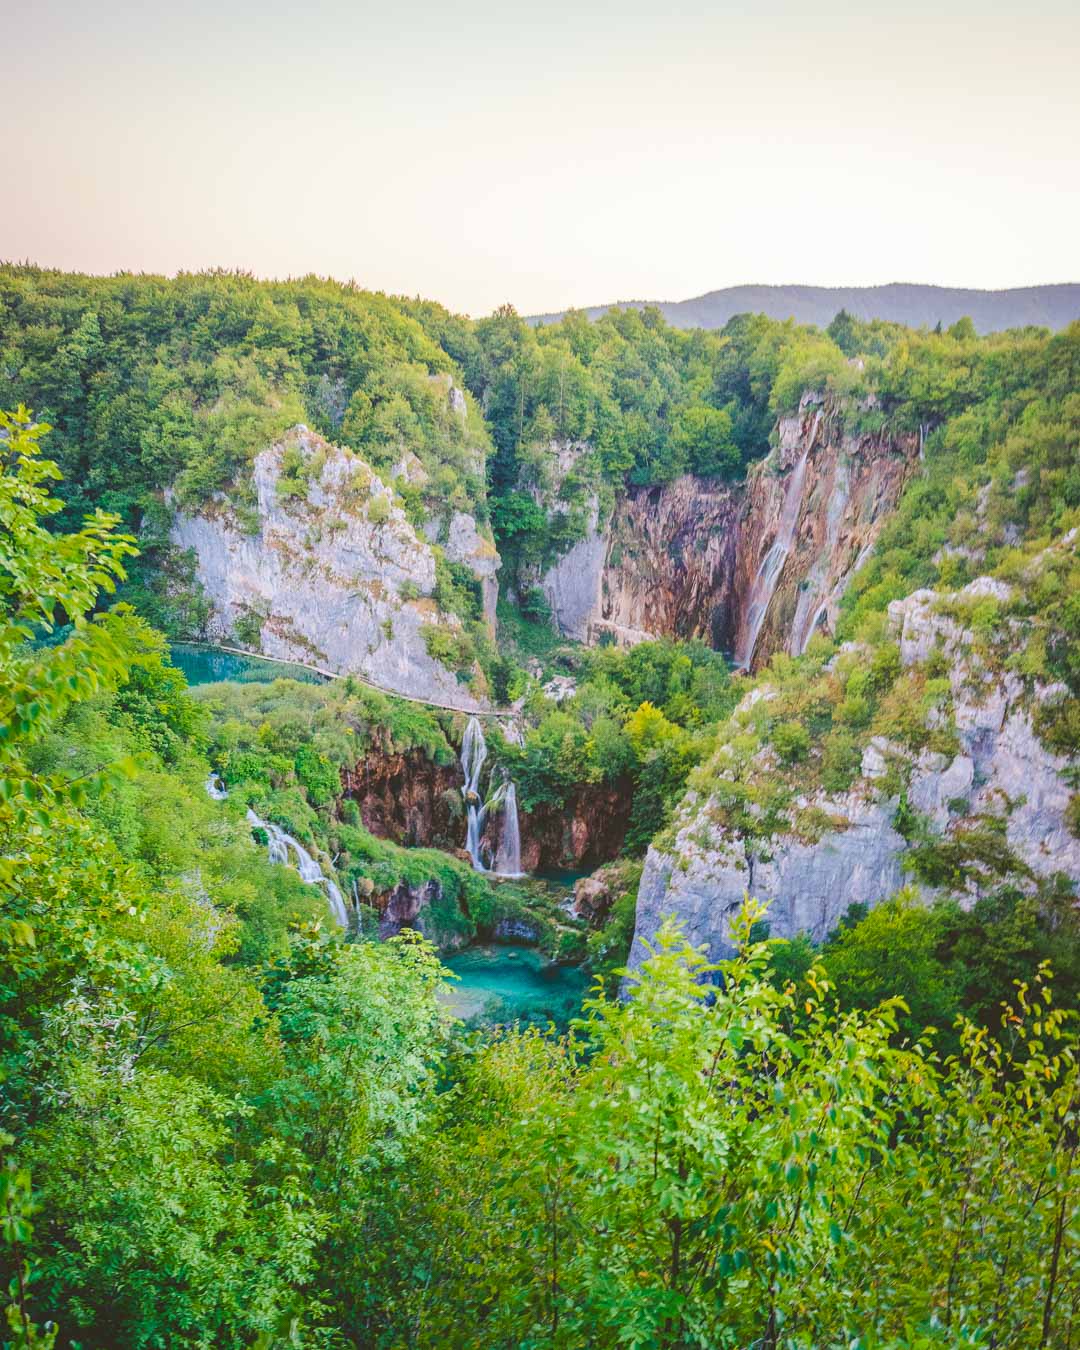 another angle of plitvice lakes from the top